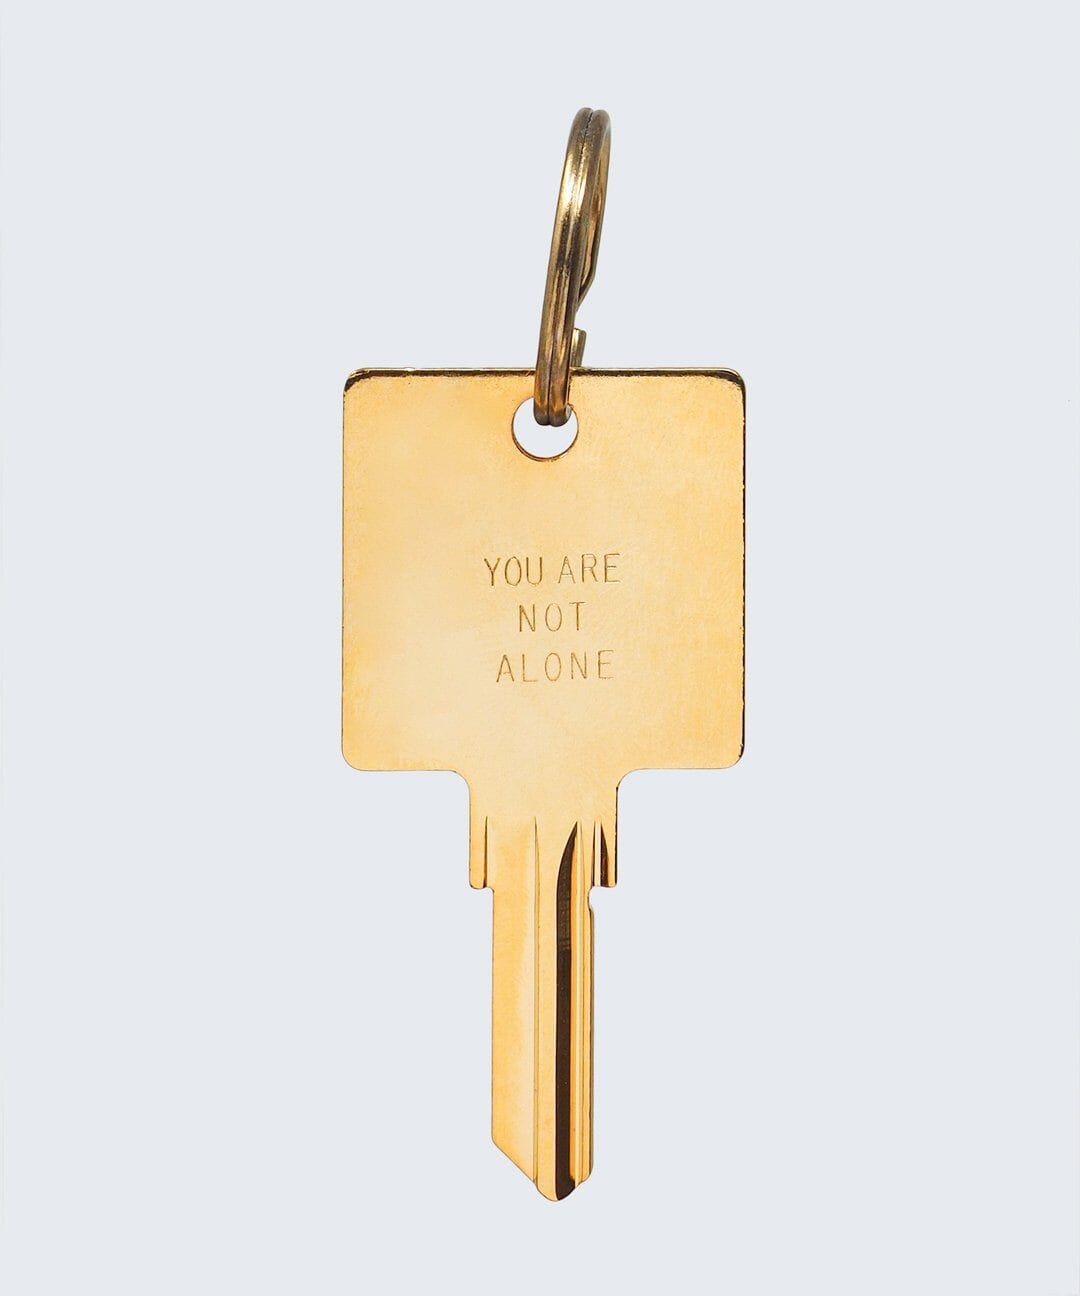 N - YOU ARE NOT ALONE Keychain Key Chain The Giving Keys YOU ARE NOT ALONE GOLD 